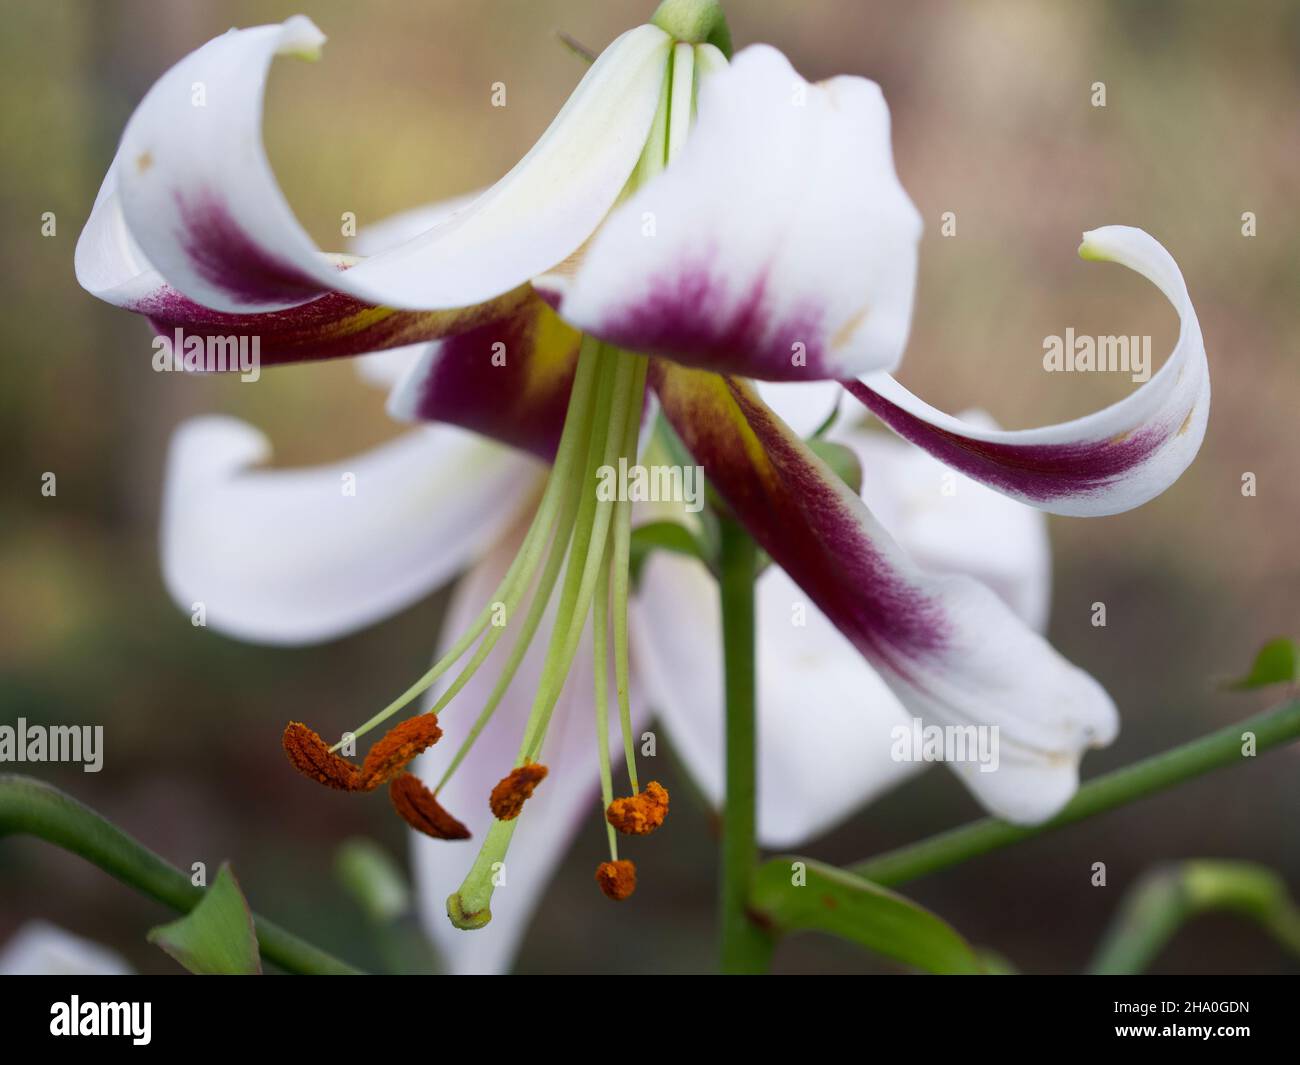 One large lily flower taken in close-up. A beautiful flower on a blurry background. Stock Photo